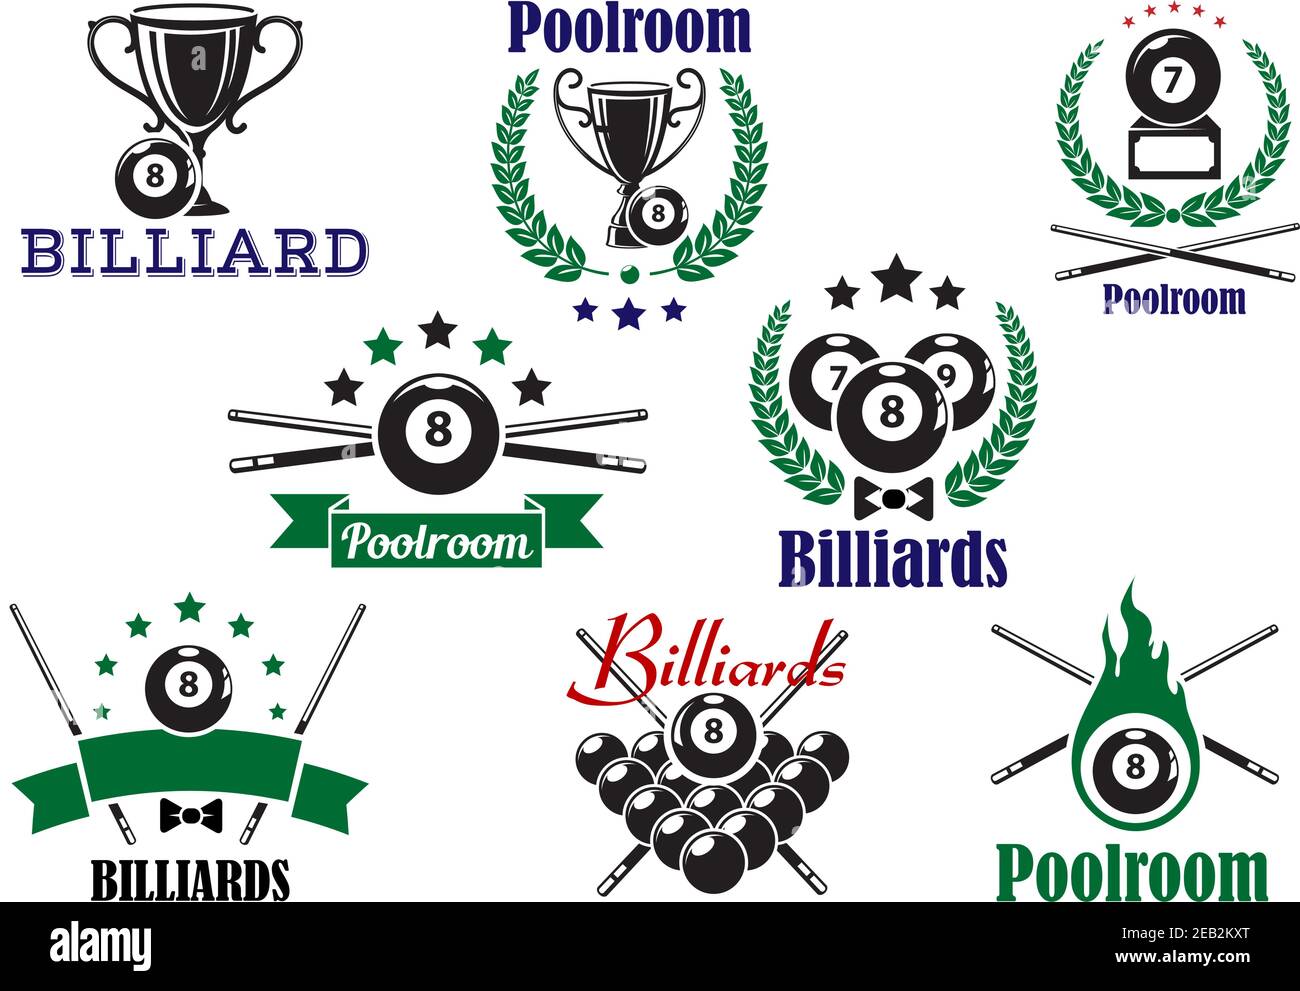 Billiard game or poolroom icons and symbols with balls, trophy cup, crossed cues and decorations Stock Vector